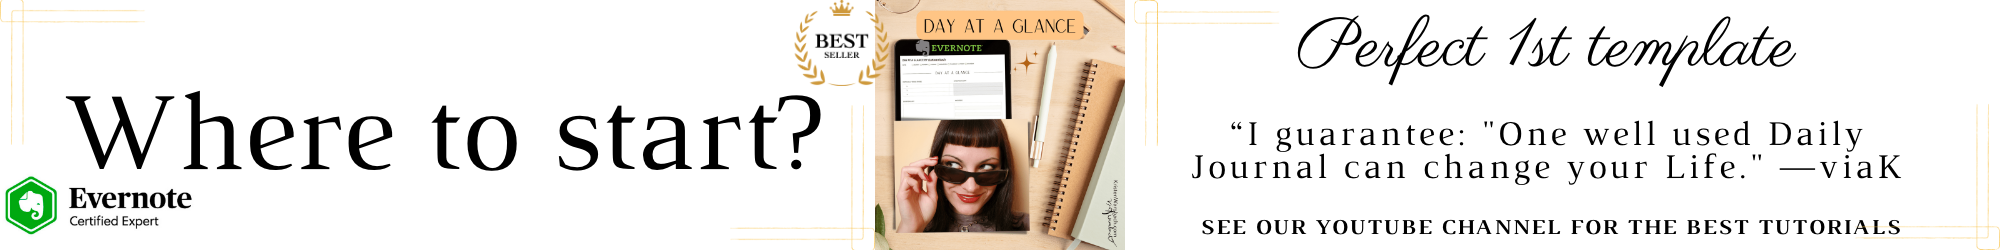 Evernote Digital Daily Planner Day at a Glance